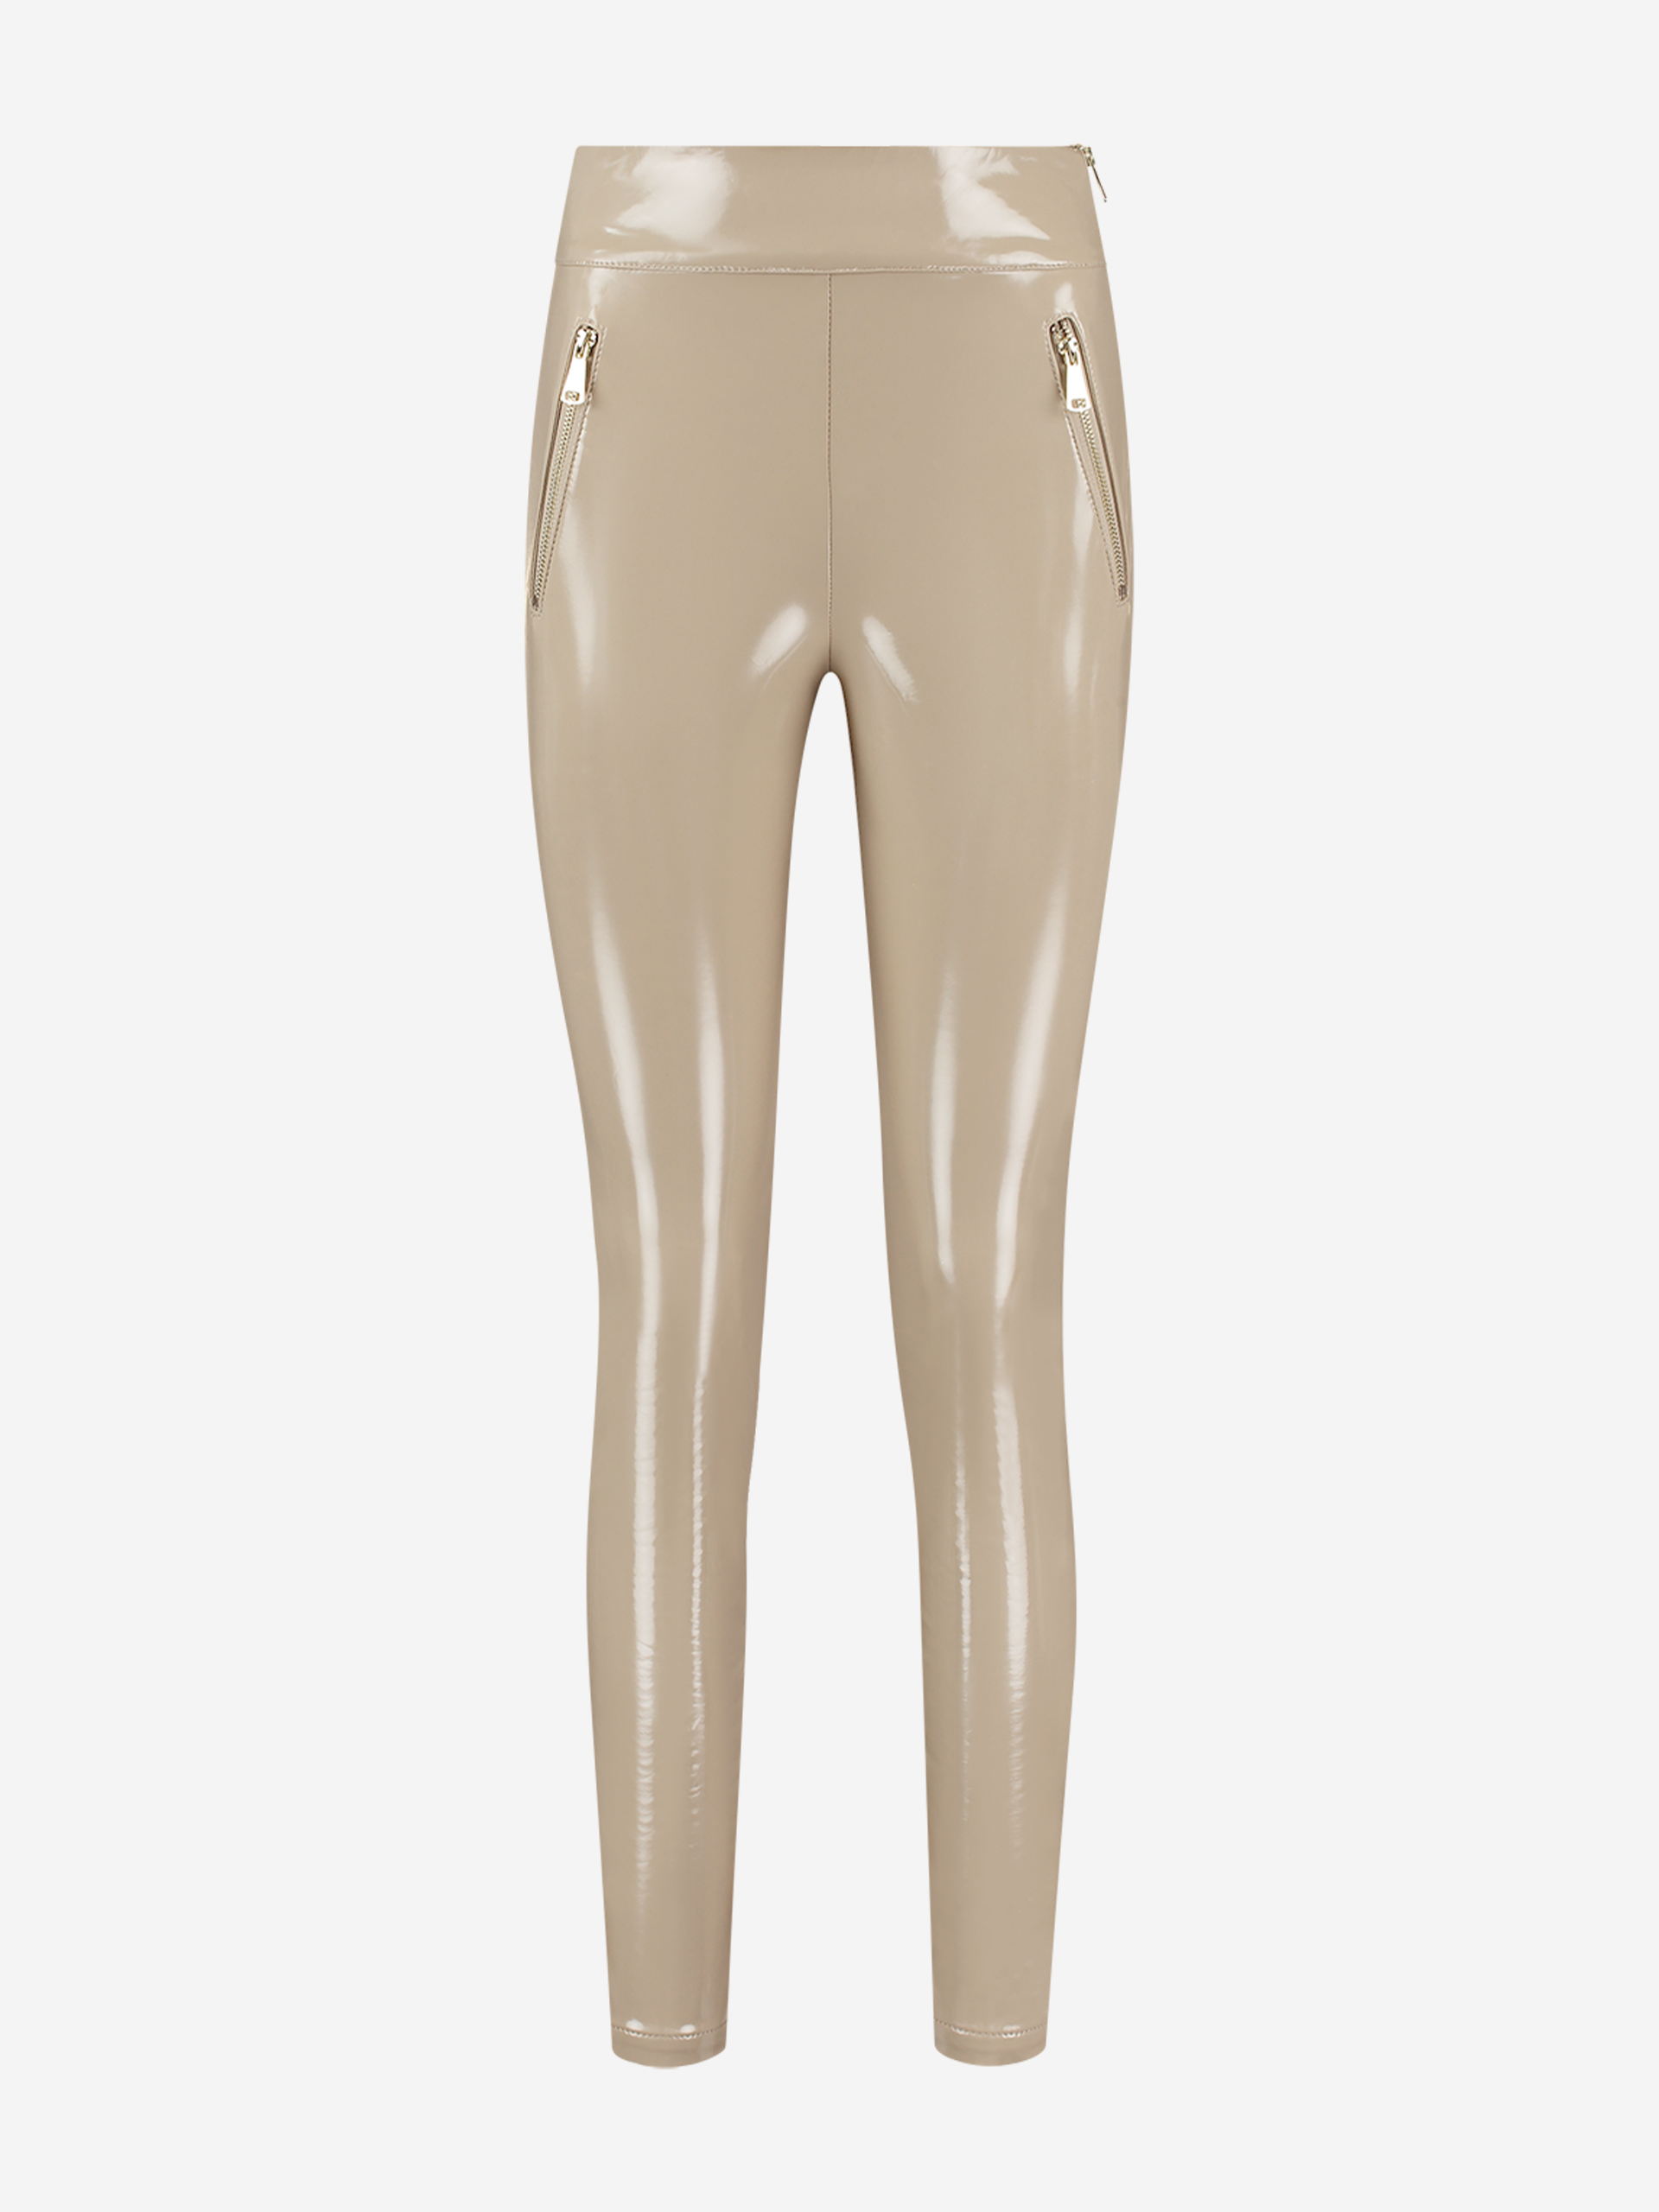 Shiny pants with zippers